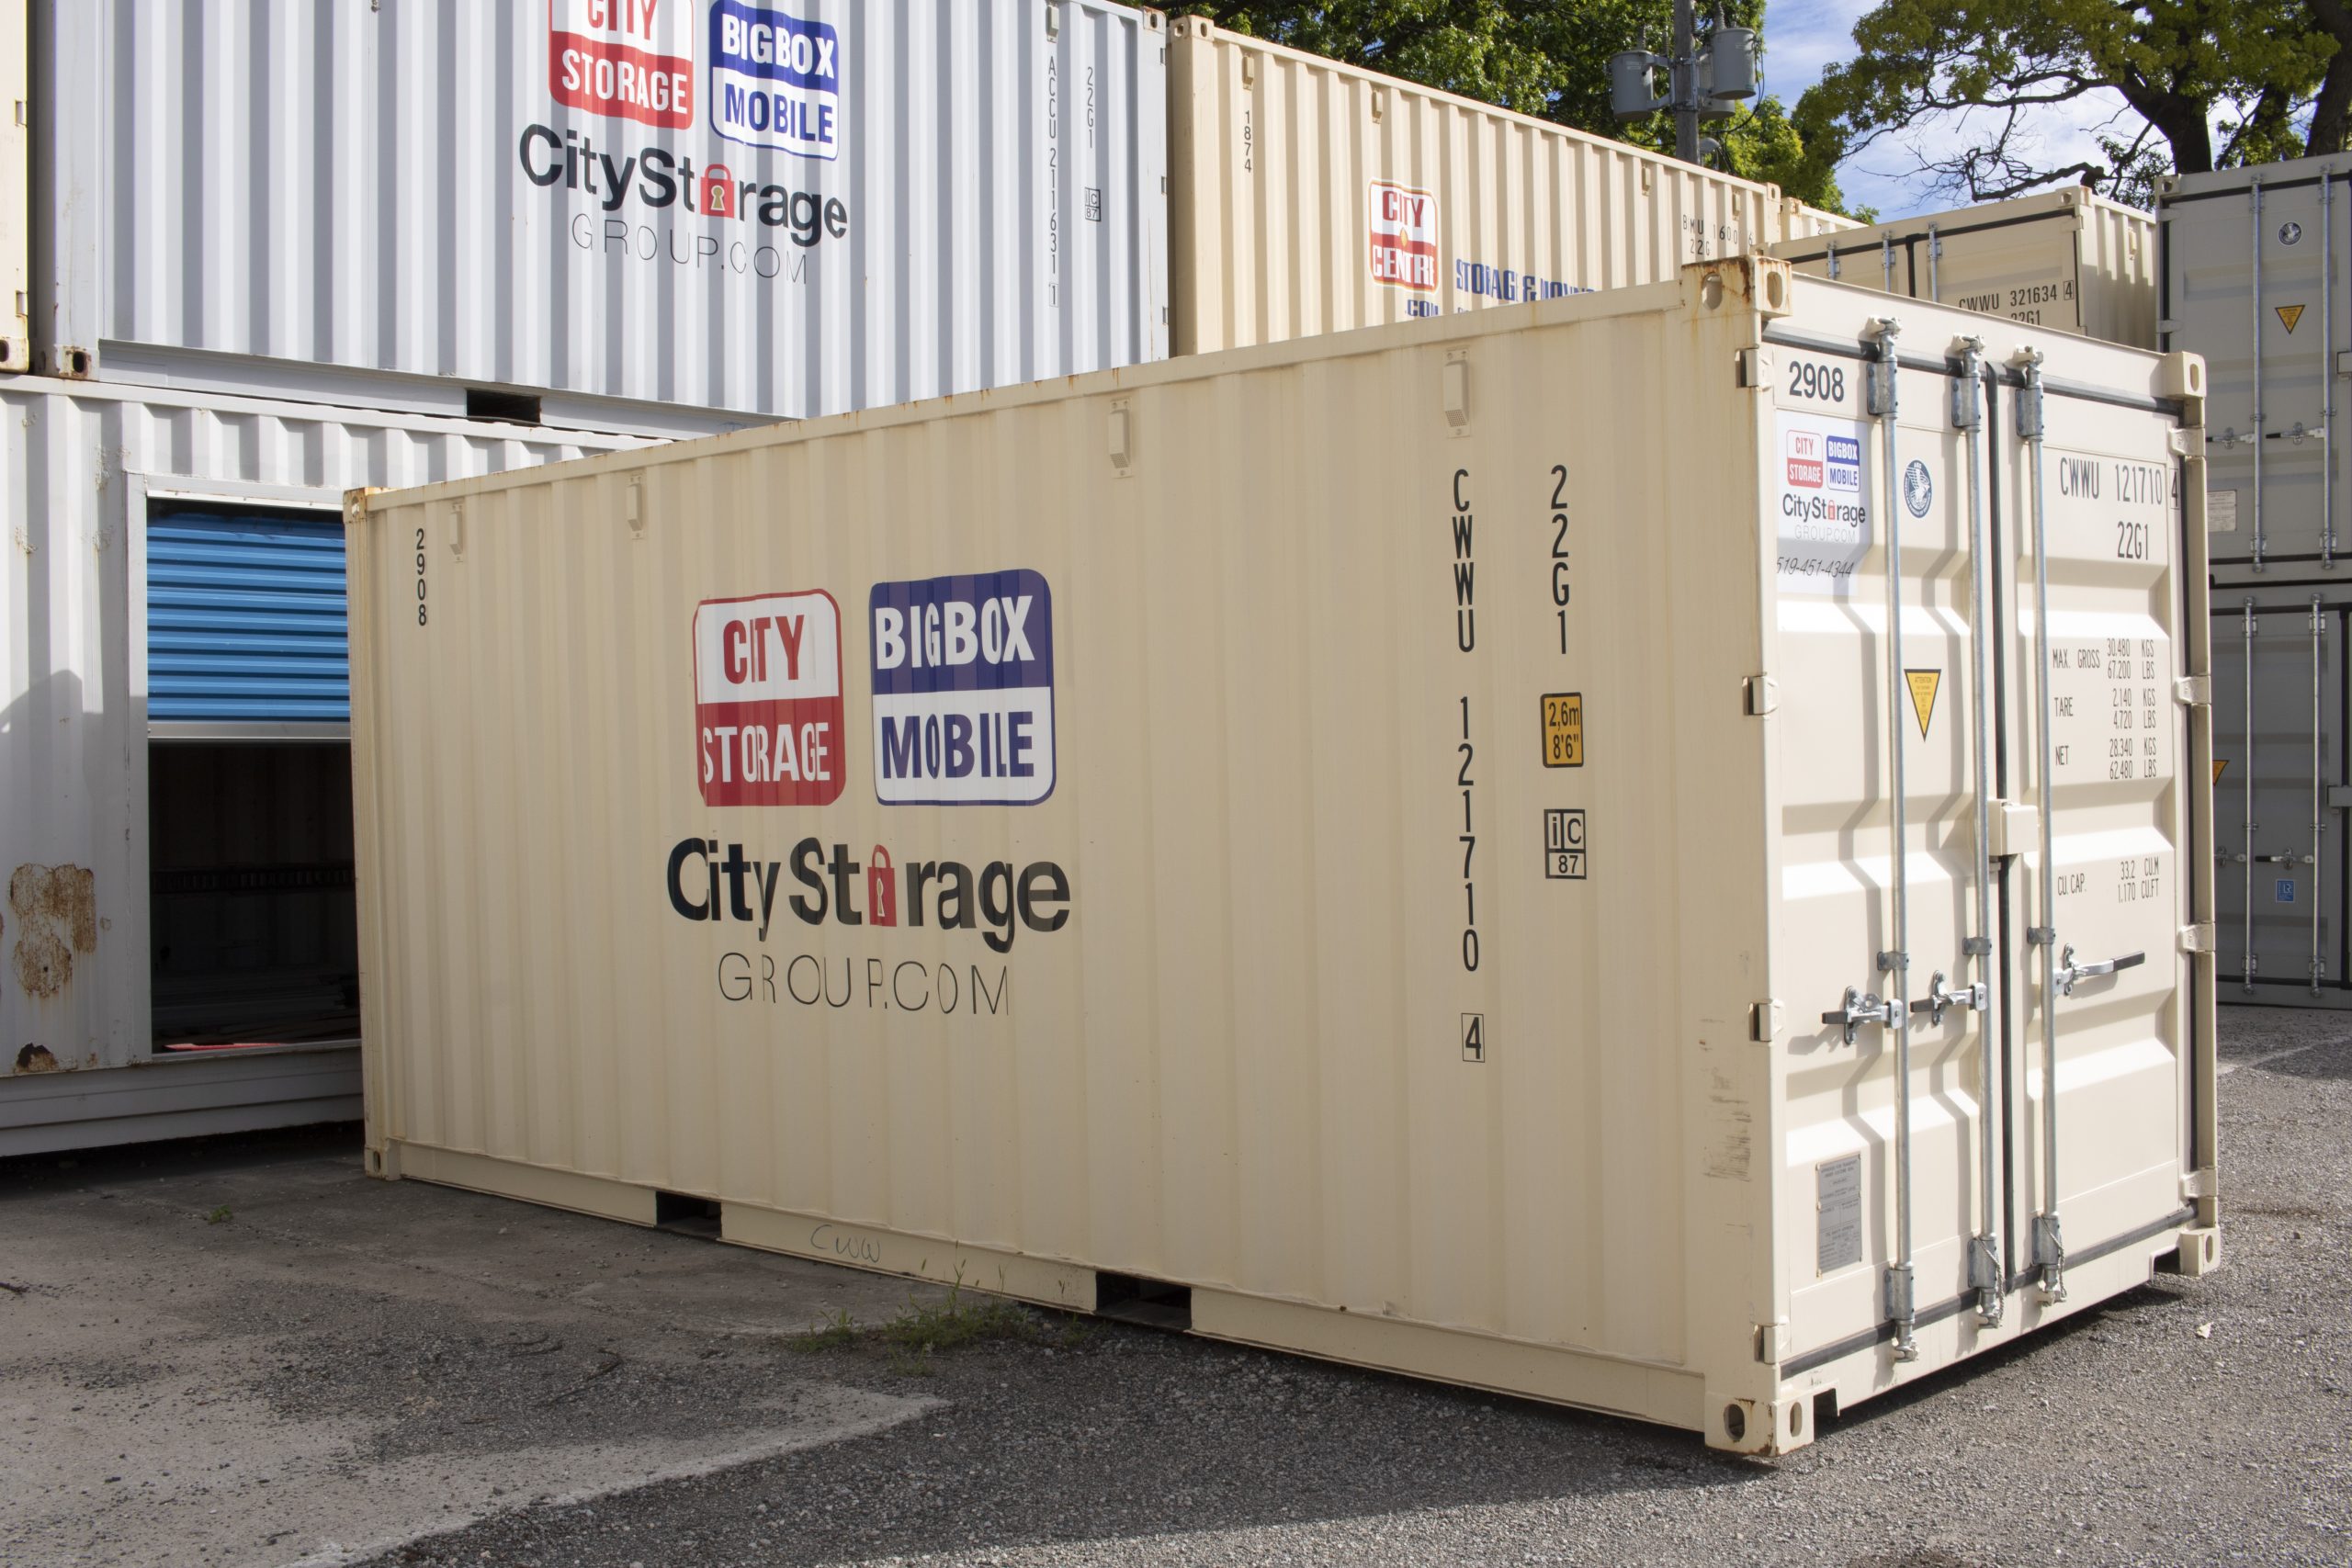 shipping containers used for storage at Big Box Mobile lot in London, Ontario